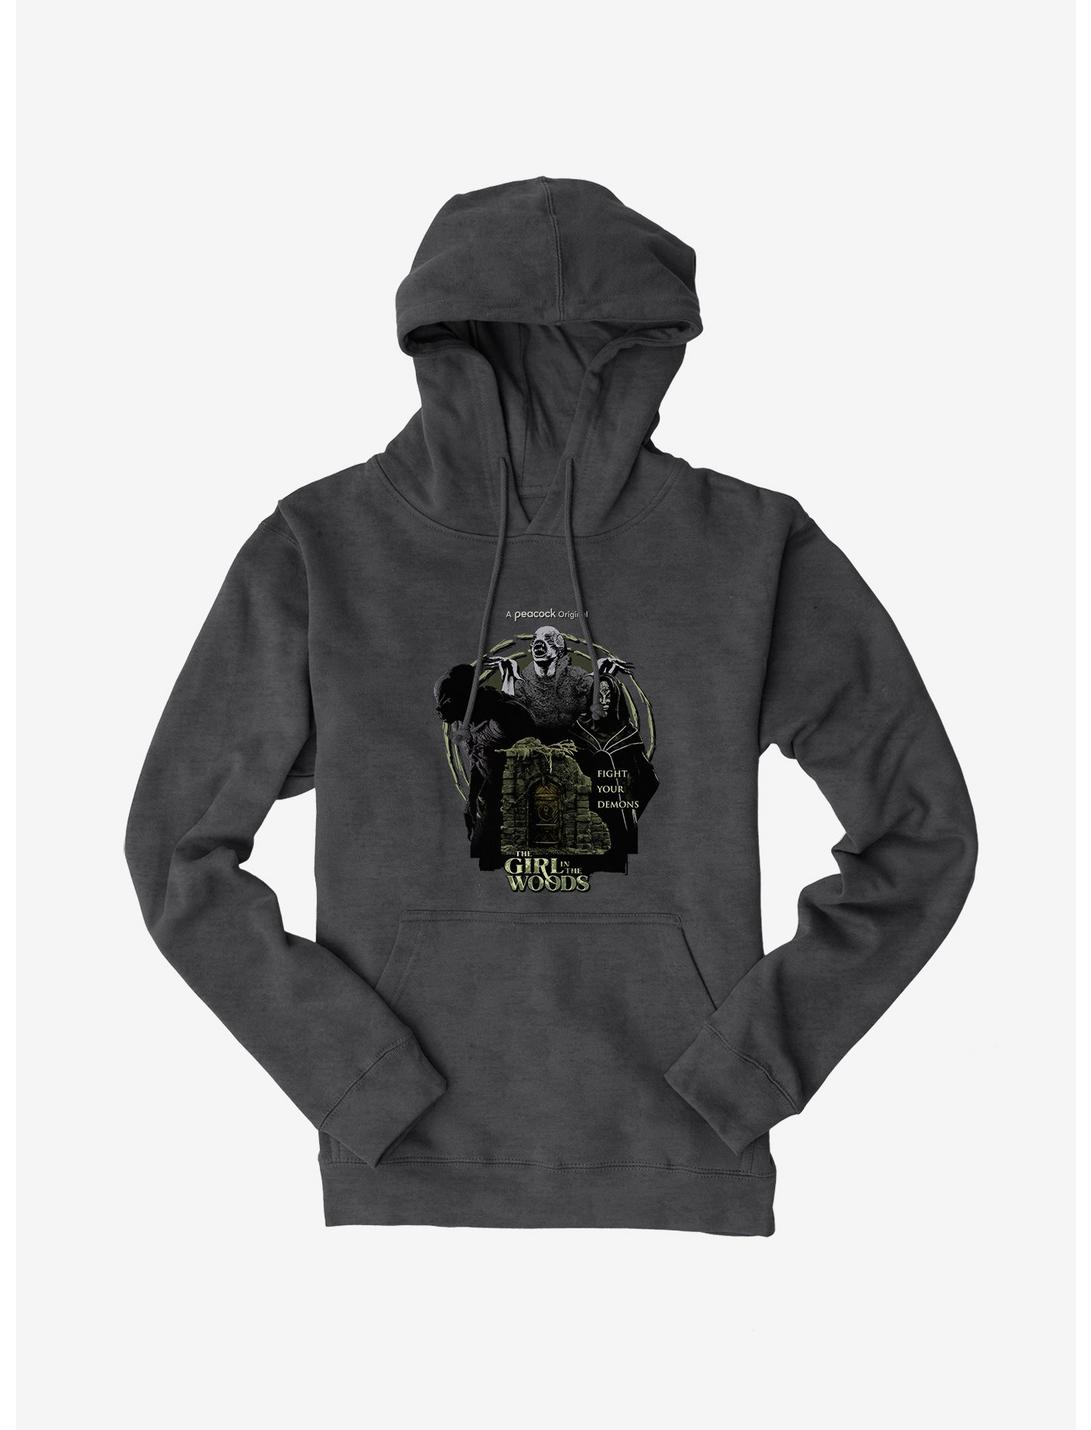 Peacock TV Girl In The Woods Fight Your Demons Hoodie, CHARCOAL HEATHER, hi-res